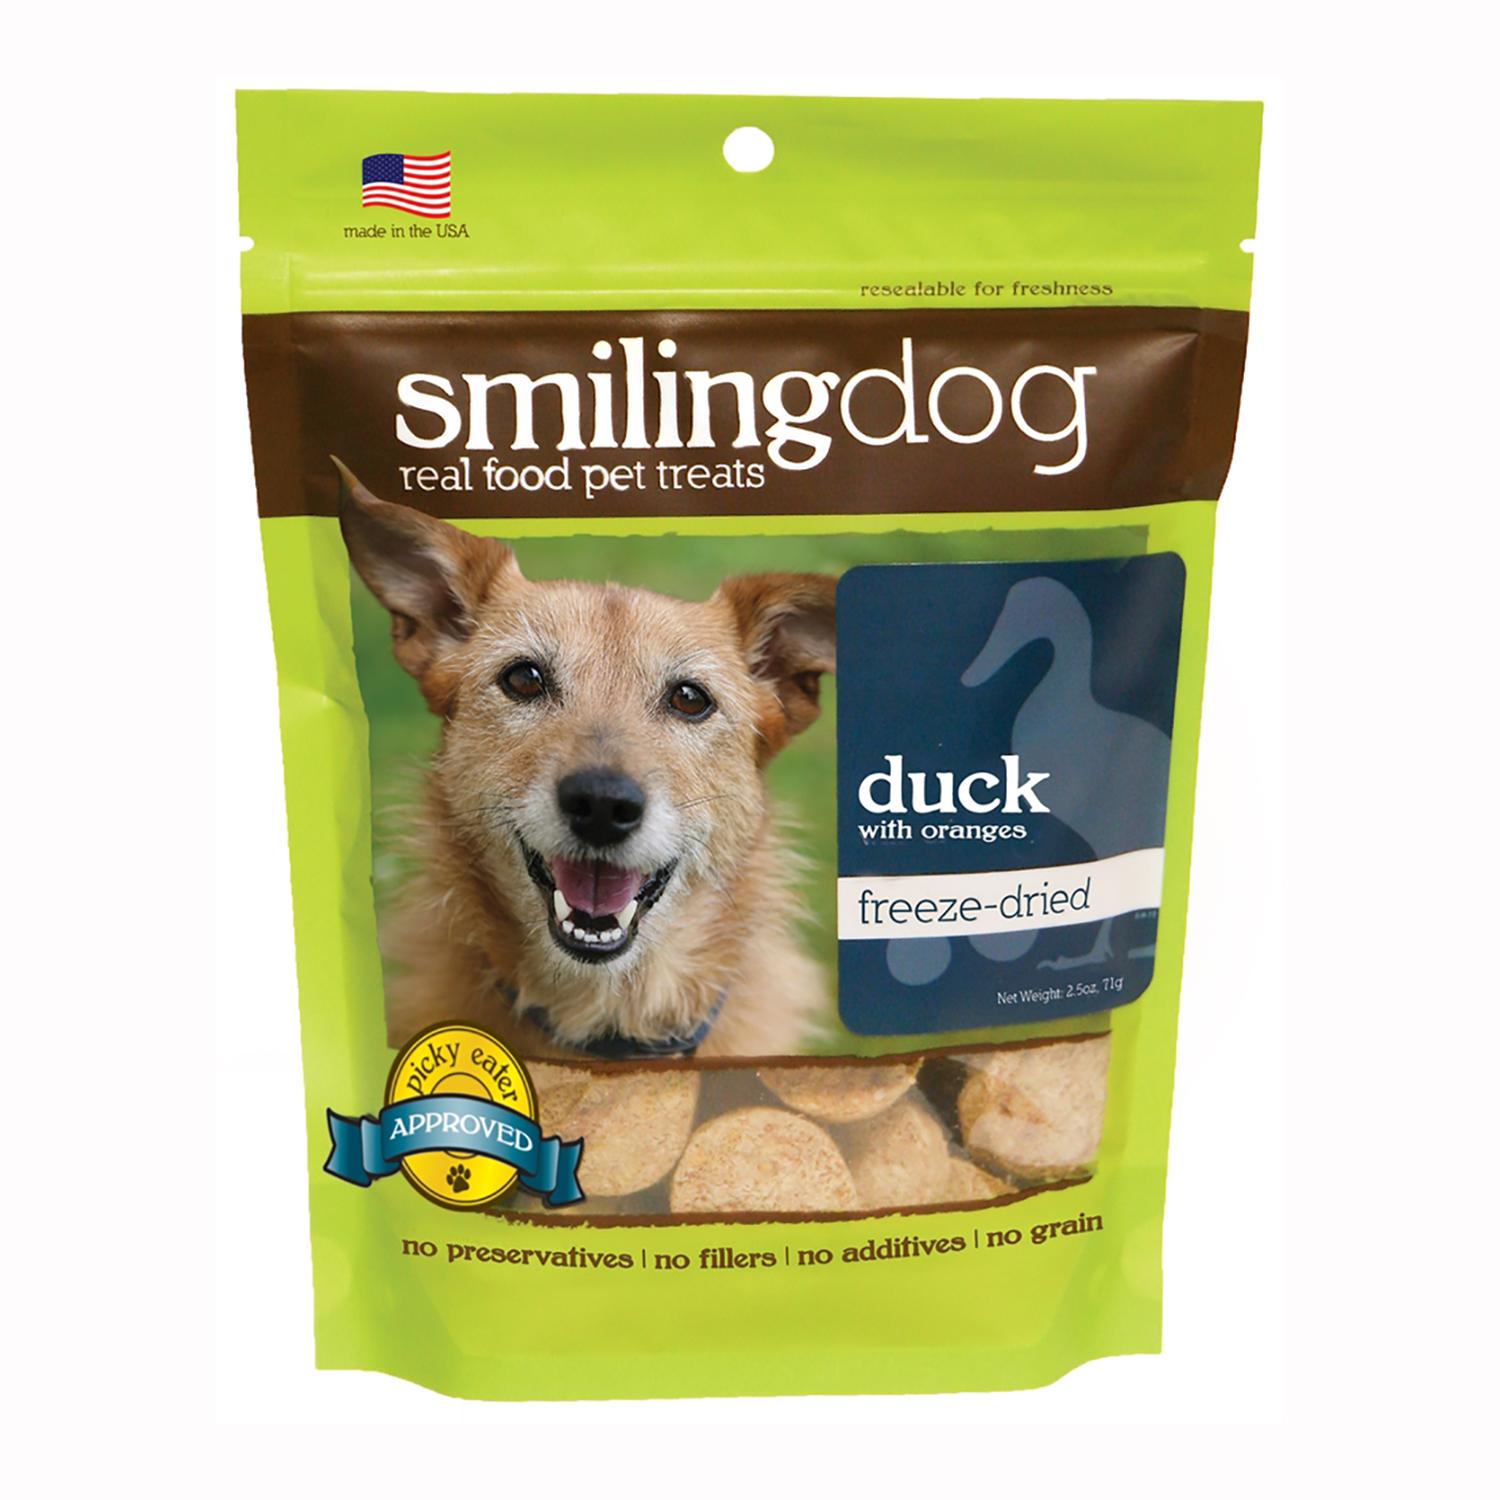 Herbsmith Freeze Dried Smiling Dog Treats - Duck